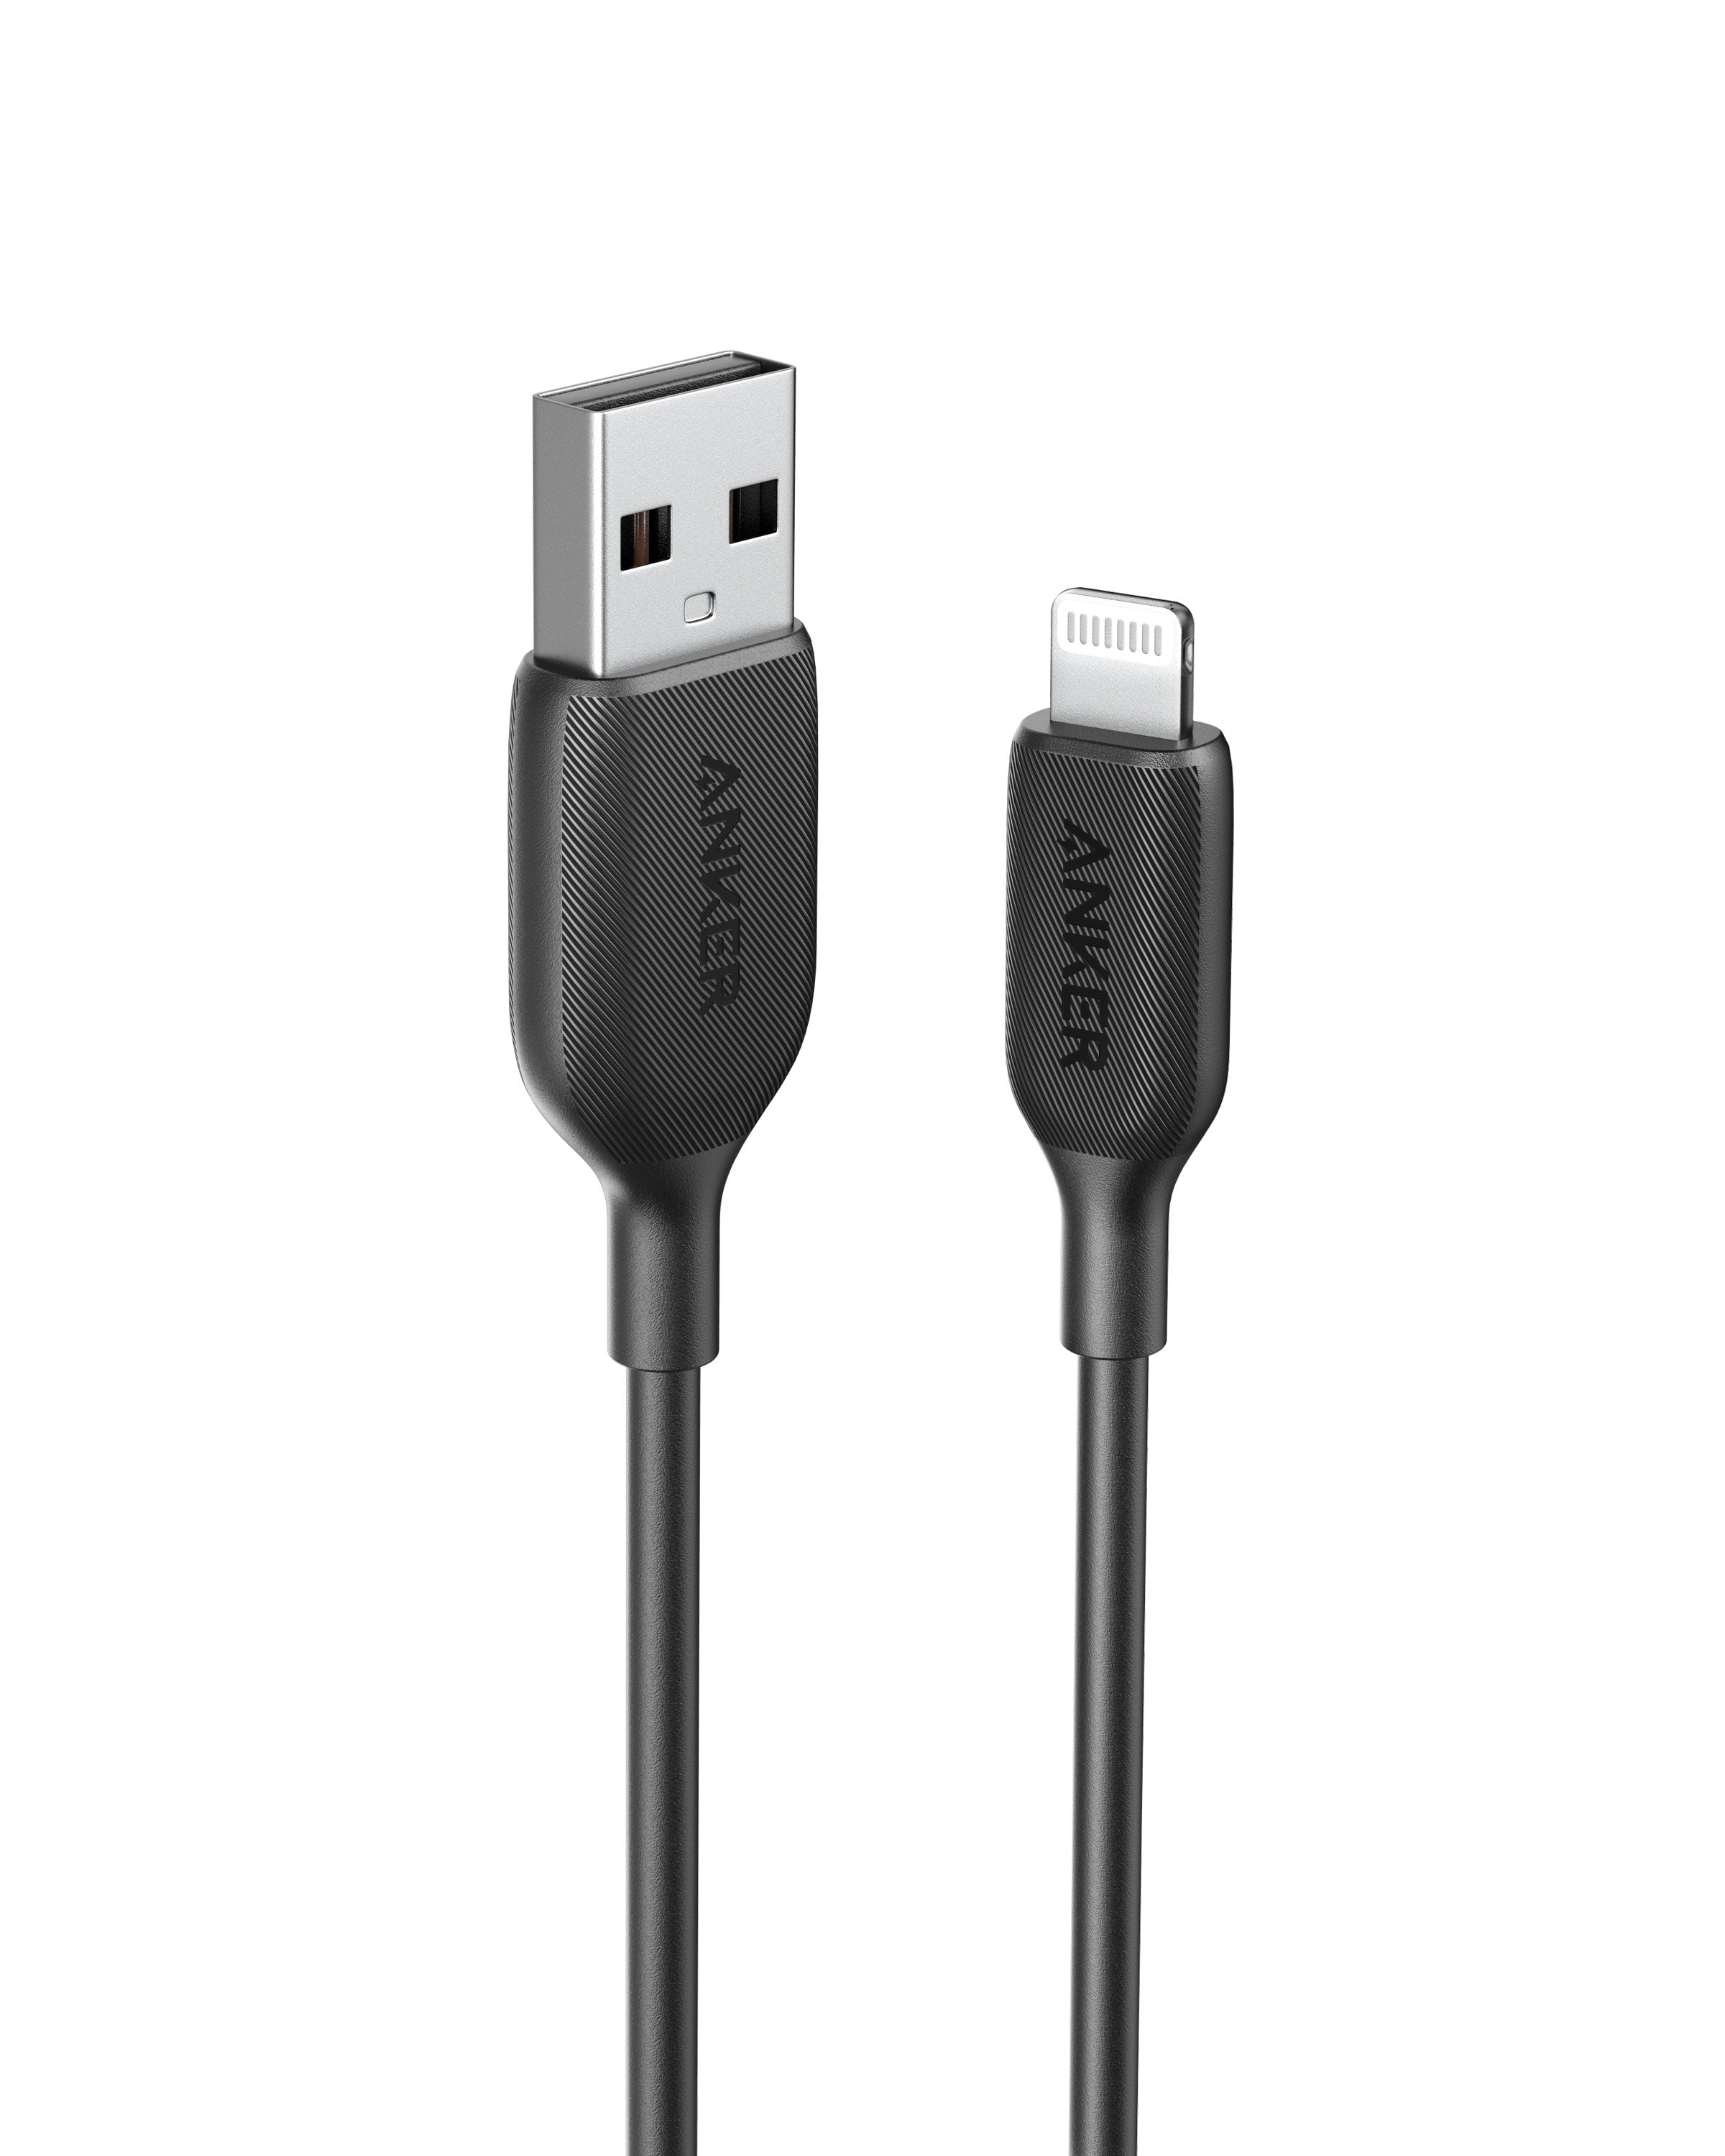 Anker 541 USB-A to Lightning Cable (3ft / 6ft) - Anker US